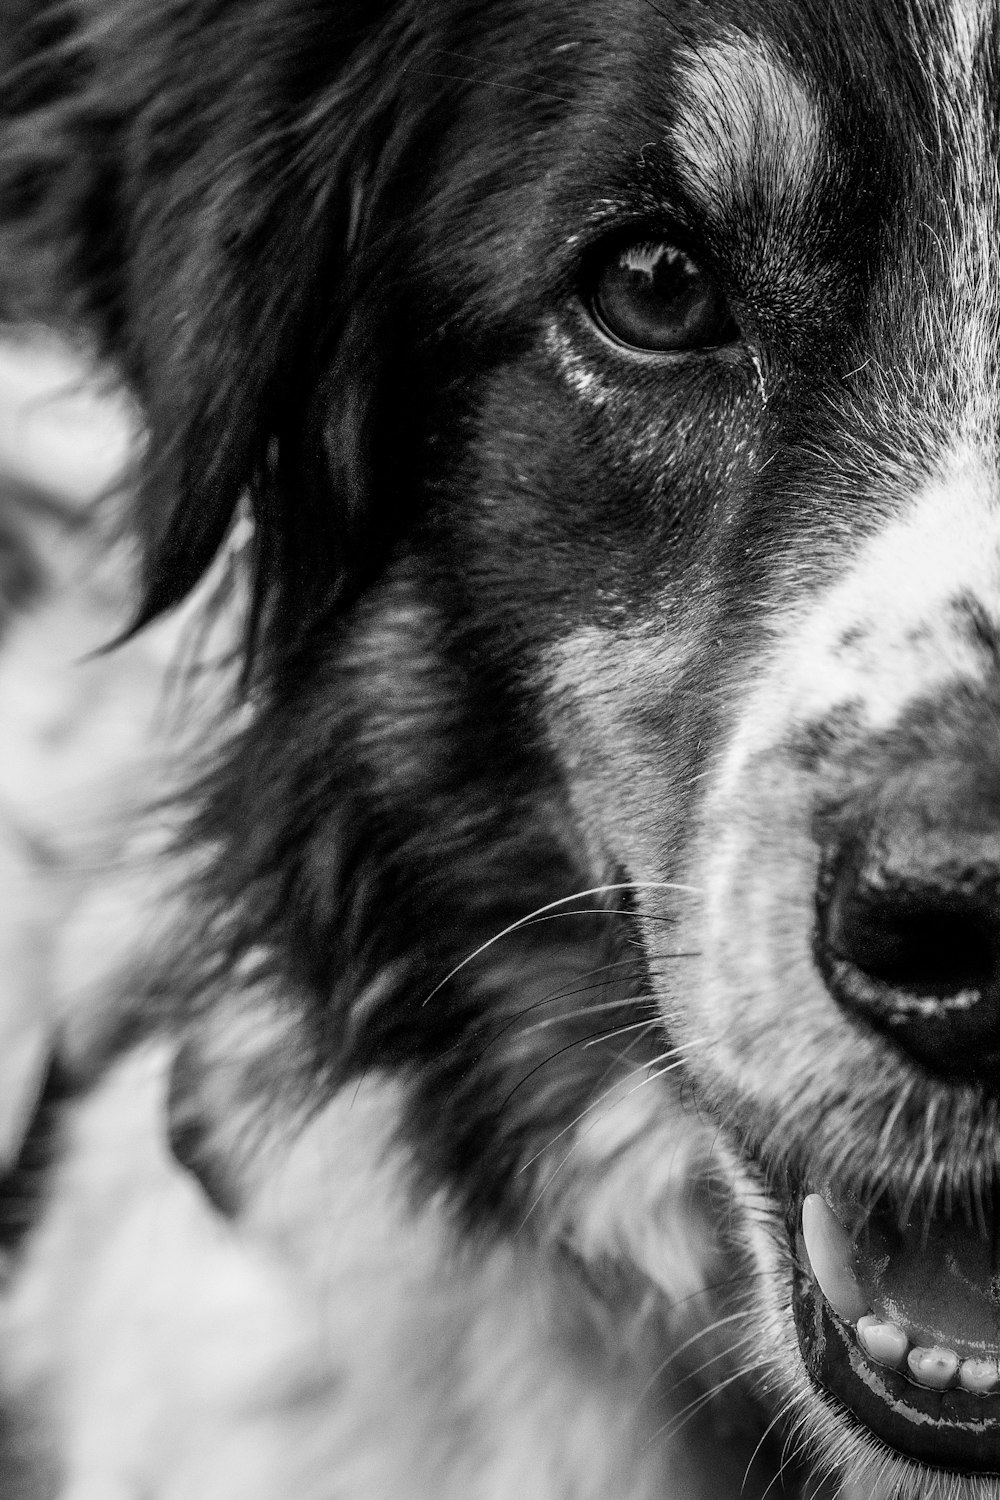 a black and white photo of a dog's face